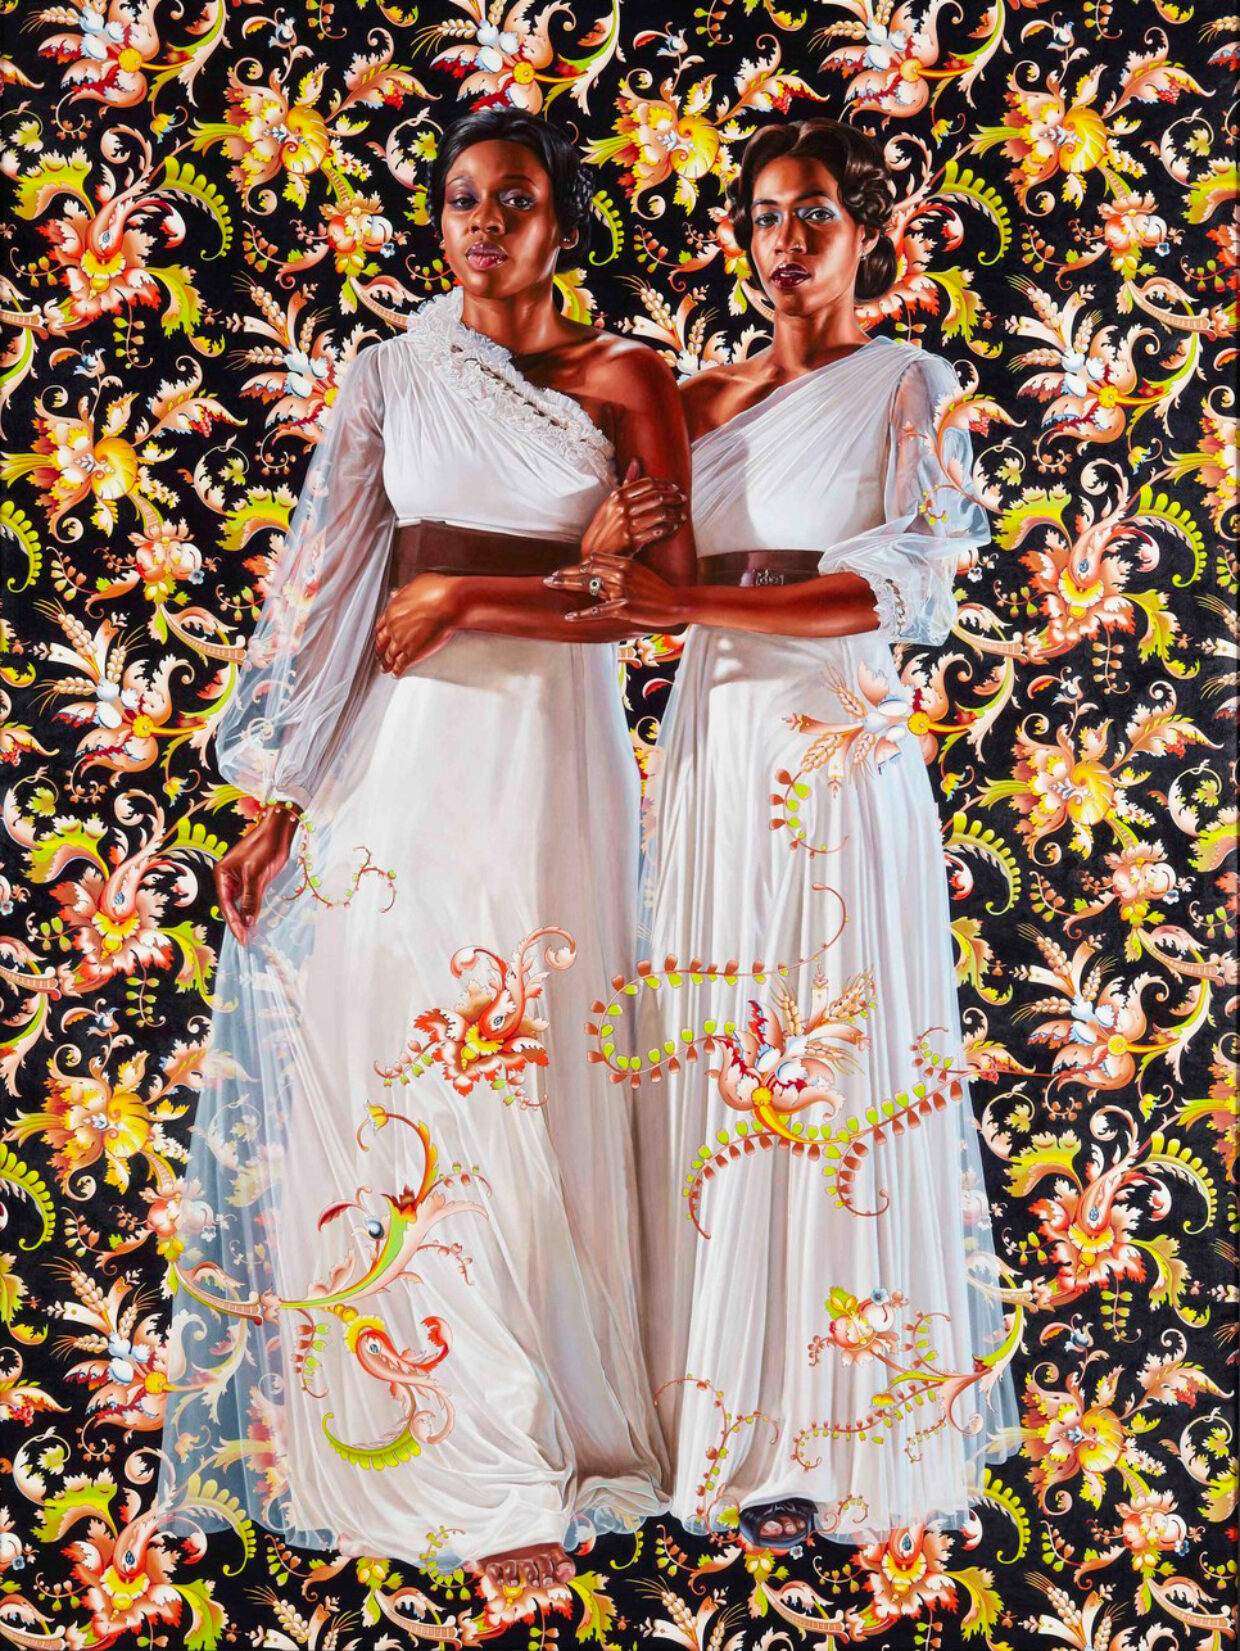 Kehinde Wiley: A discussion and book signing with Eugenie Tsai at the New York Public Library April 8 | 1